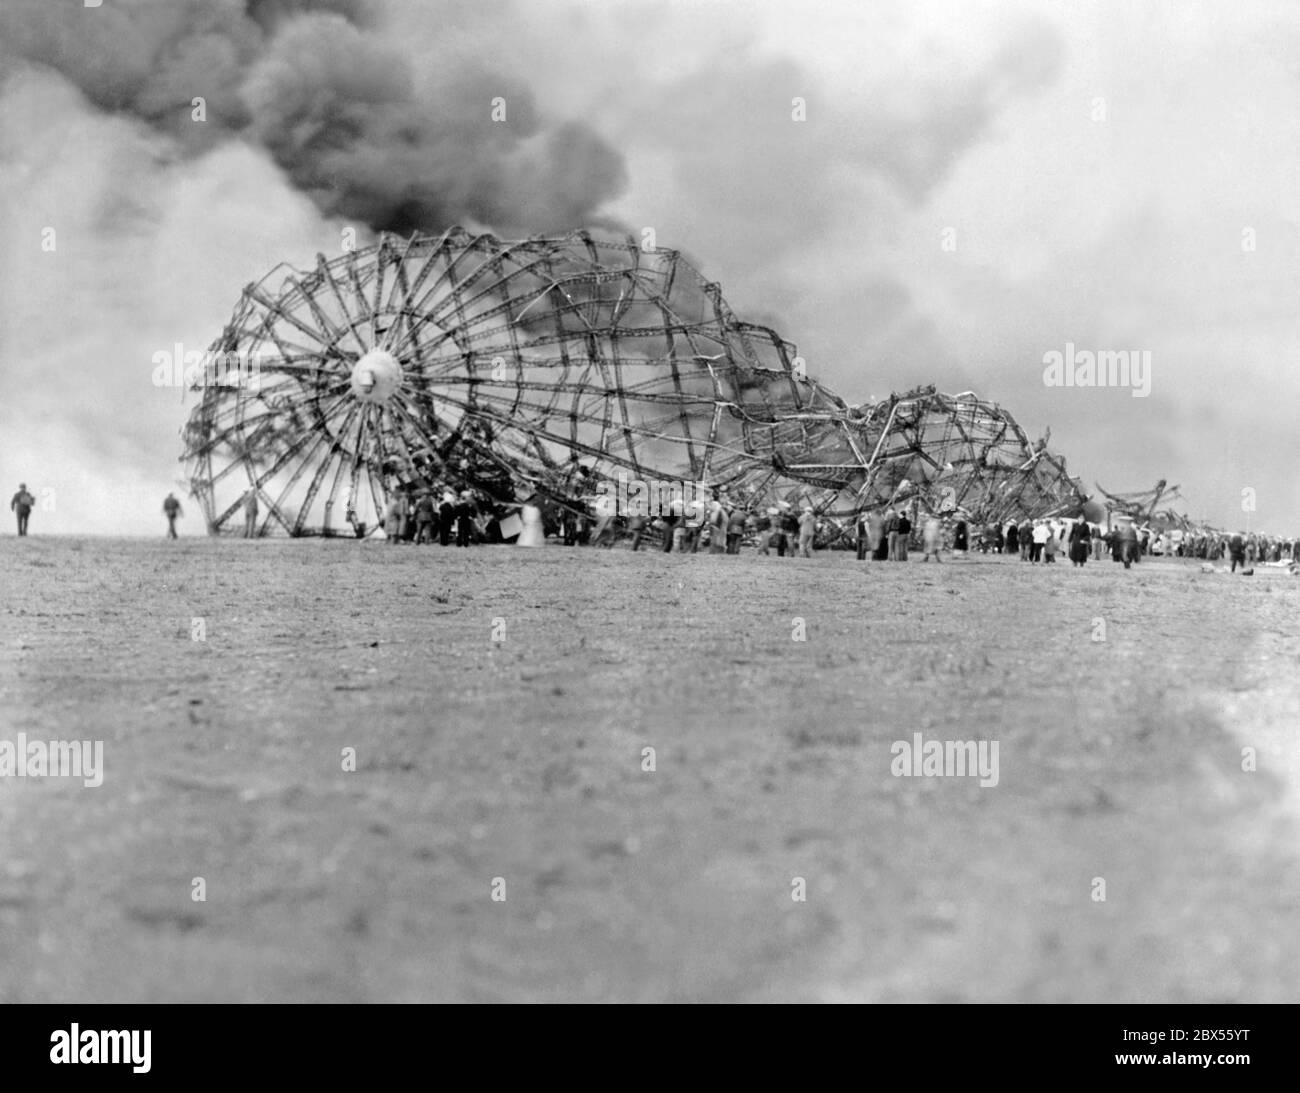 The wreck of the Hindenburg on the ground. Stock Photo